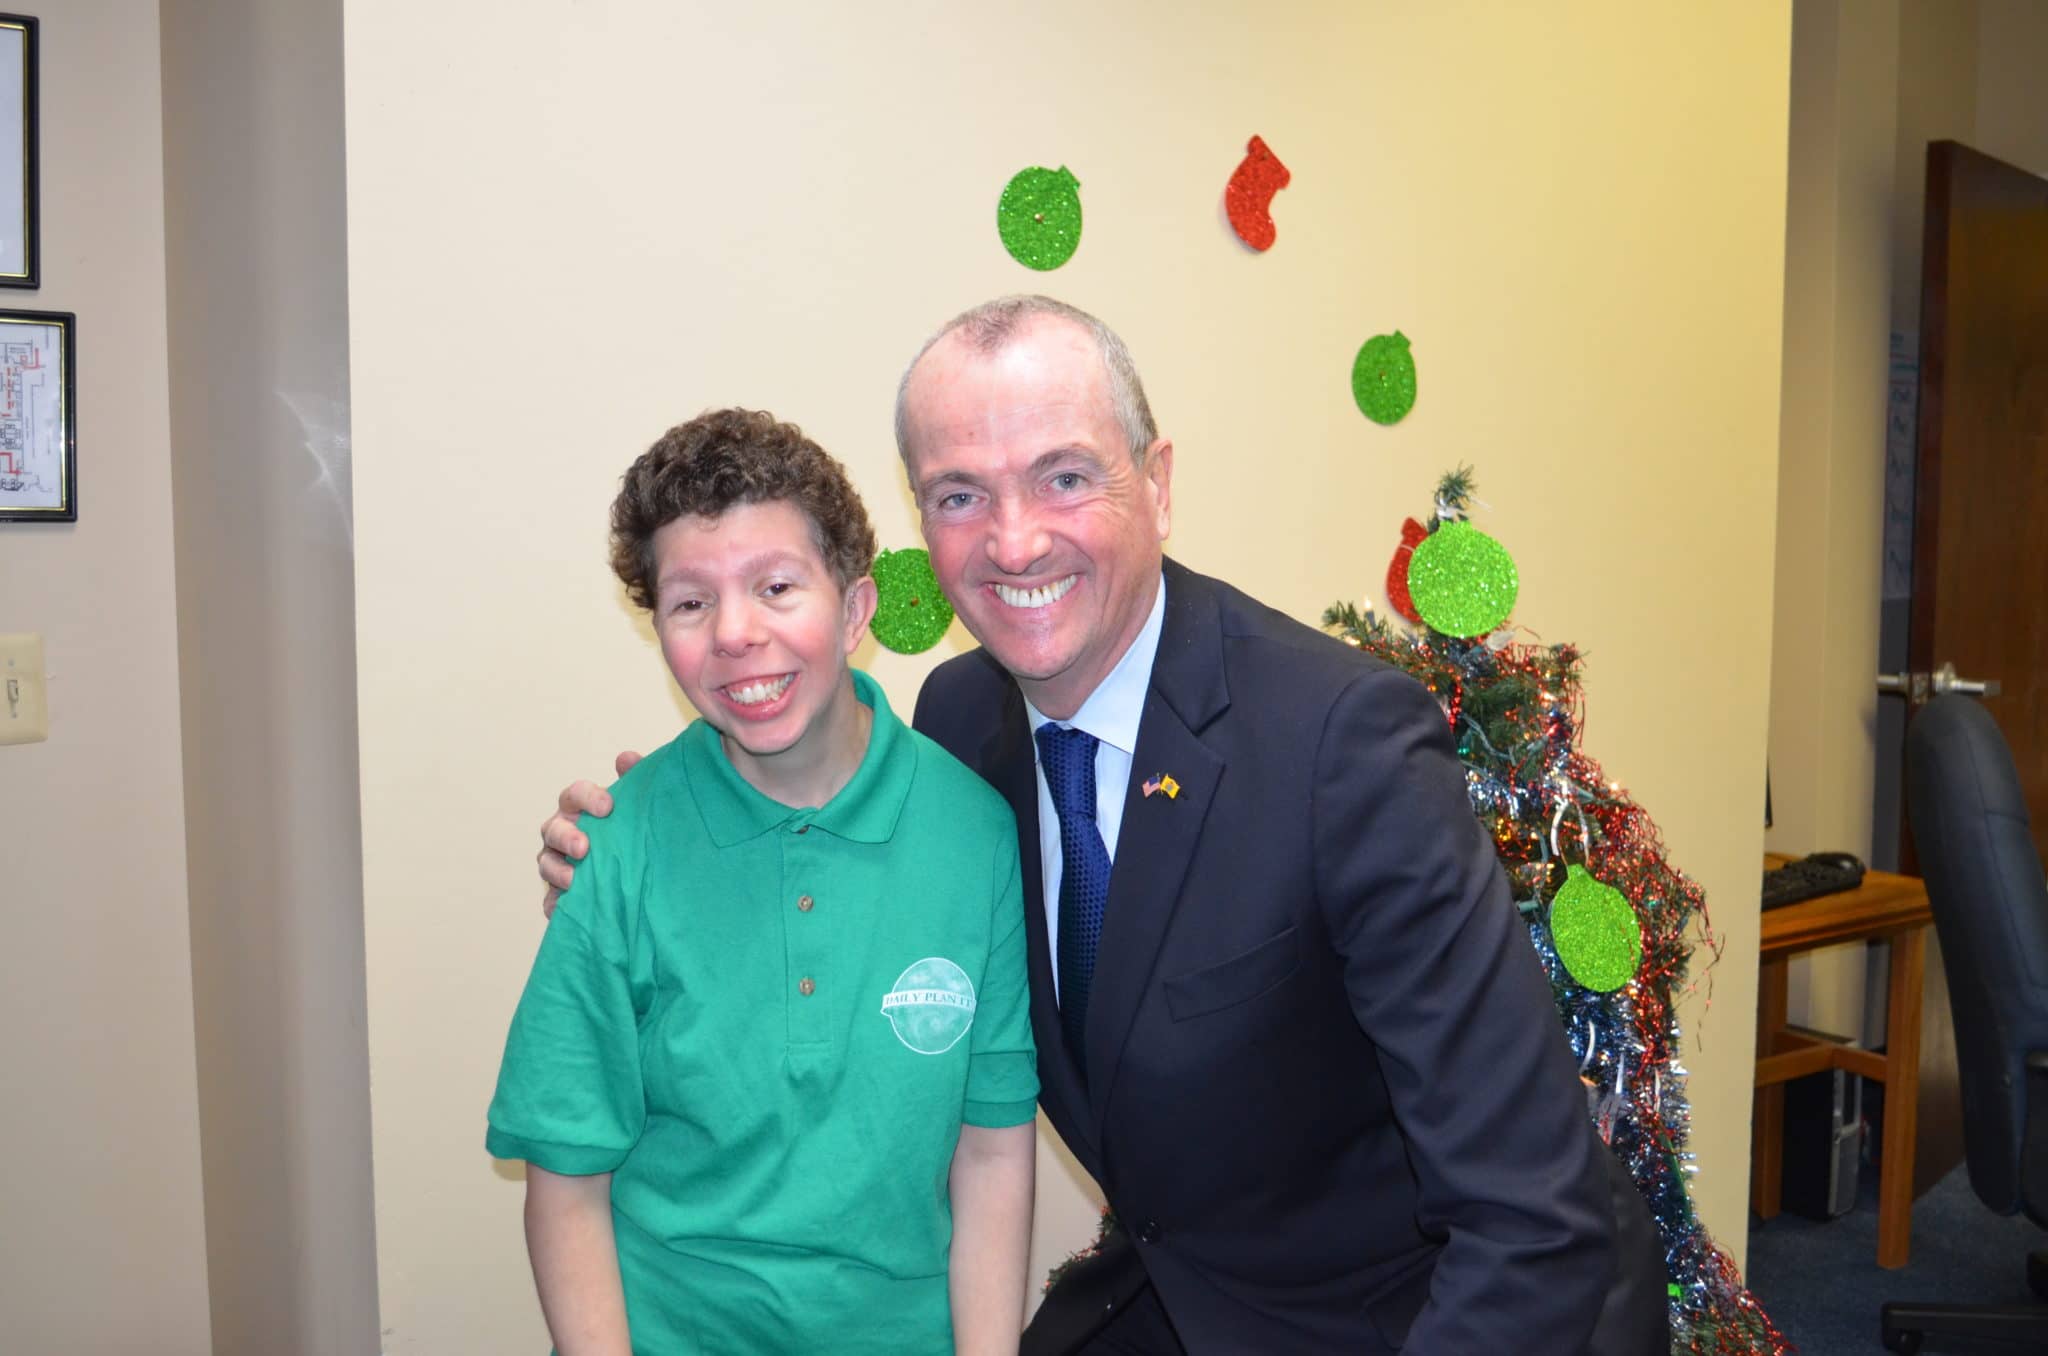 Katie T. and New Jersey gubernatorial candidate Phil Murphy.